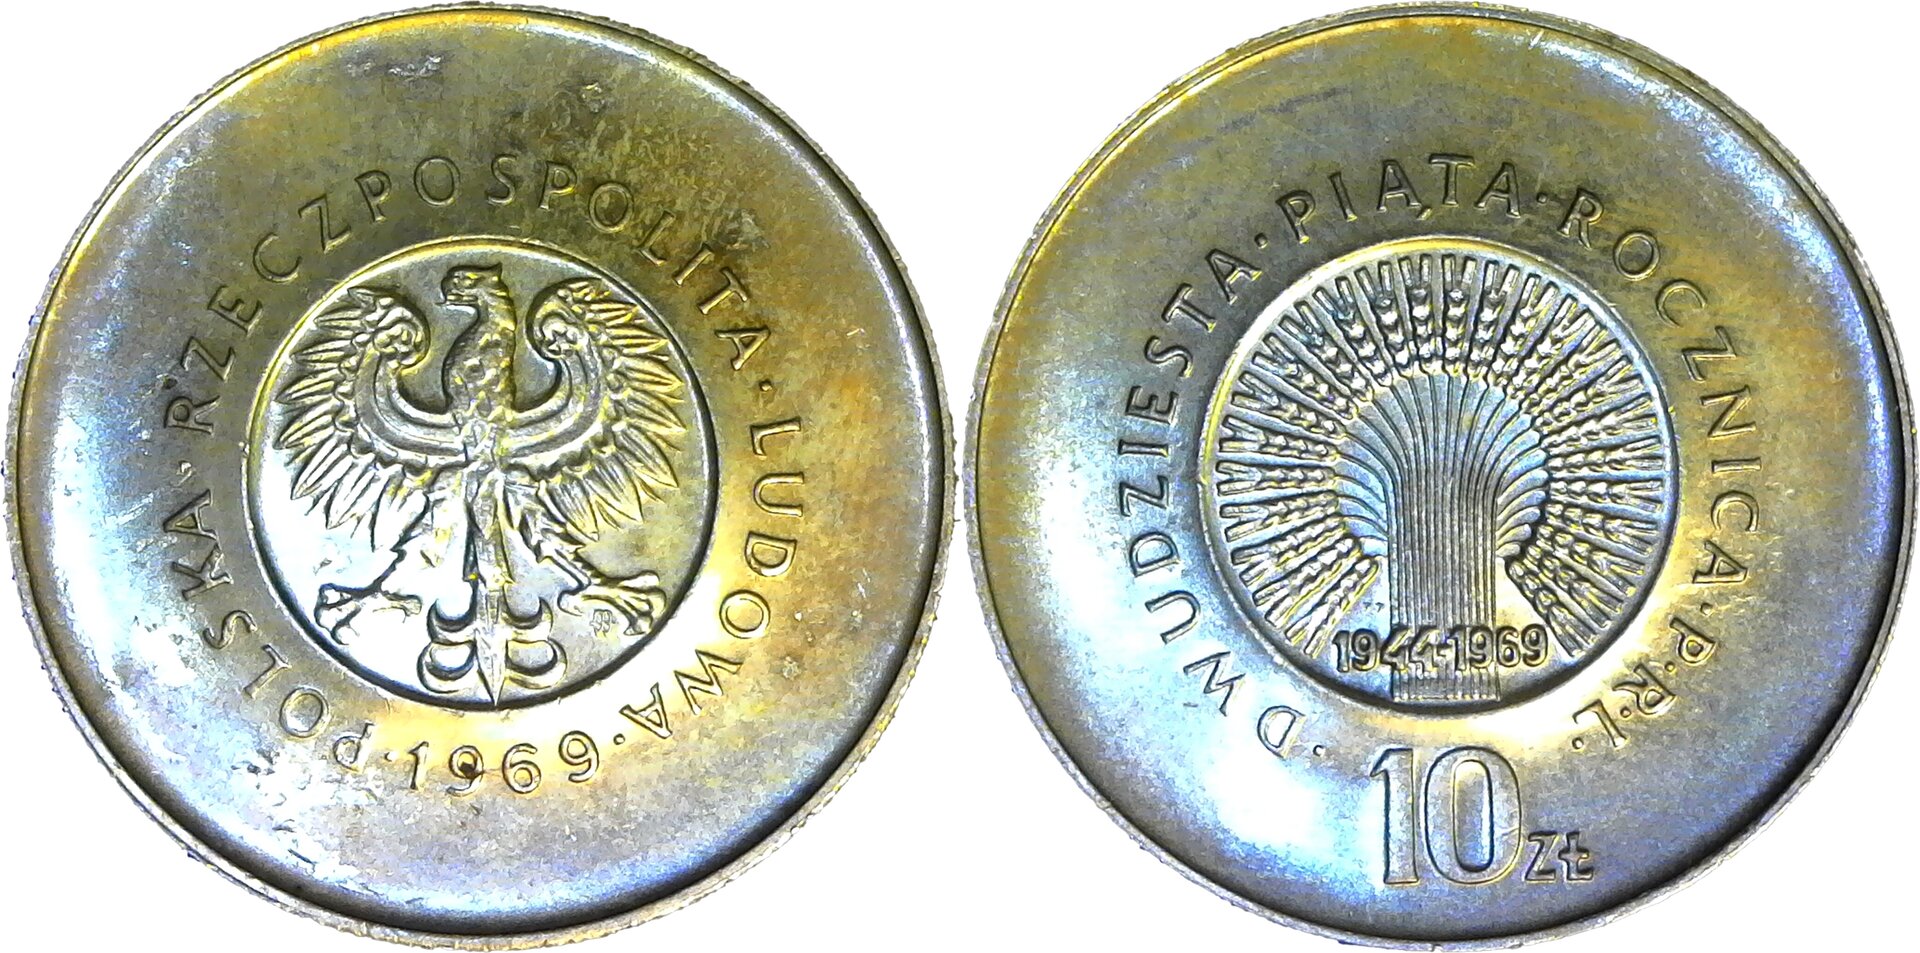 Poland 10 Zlotych 25th Anniversary - Peoples Republic 1969 obv-cutout-side.jpg